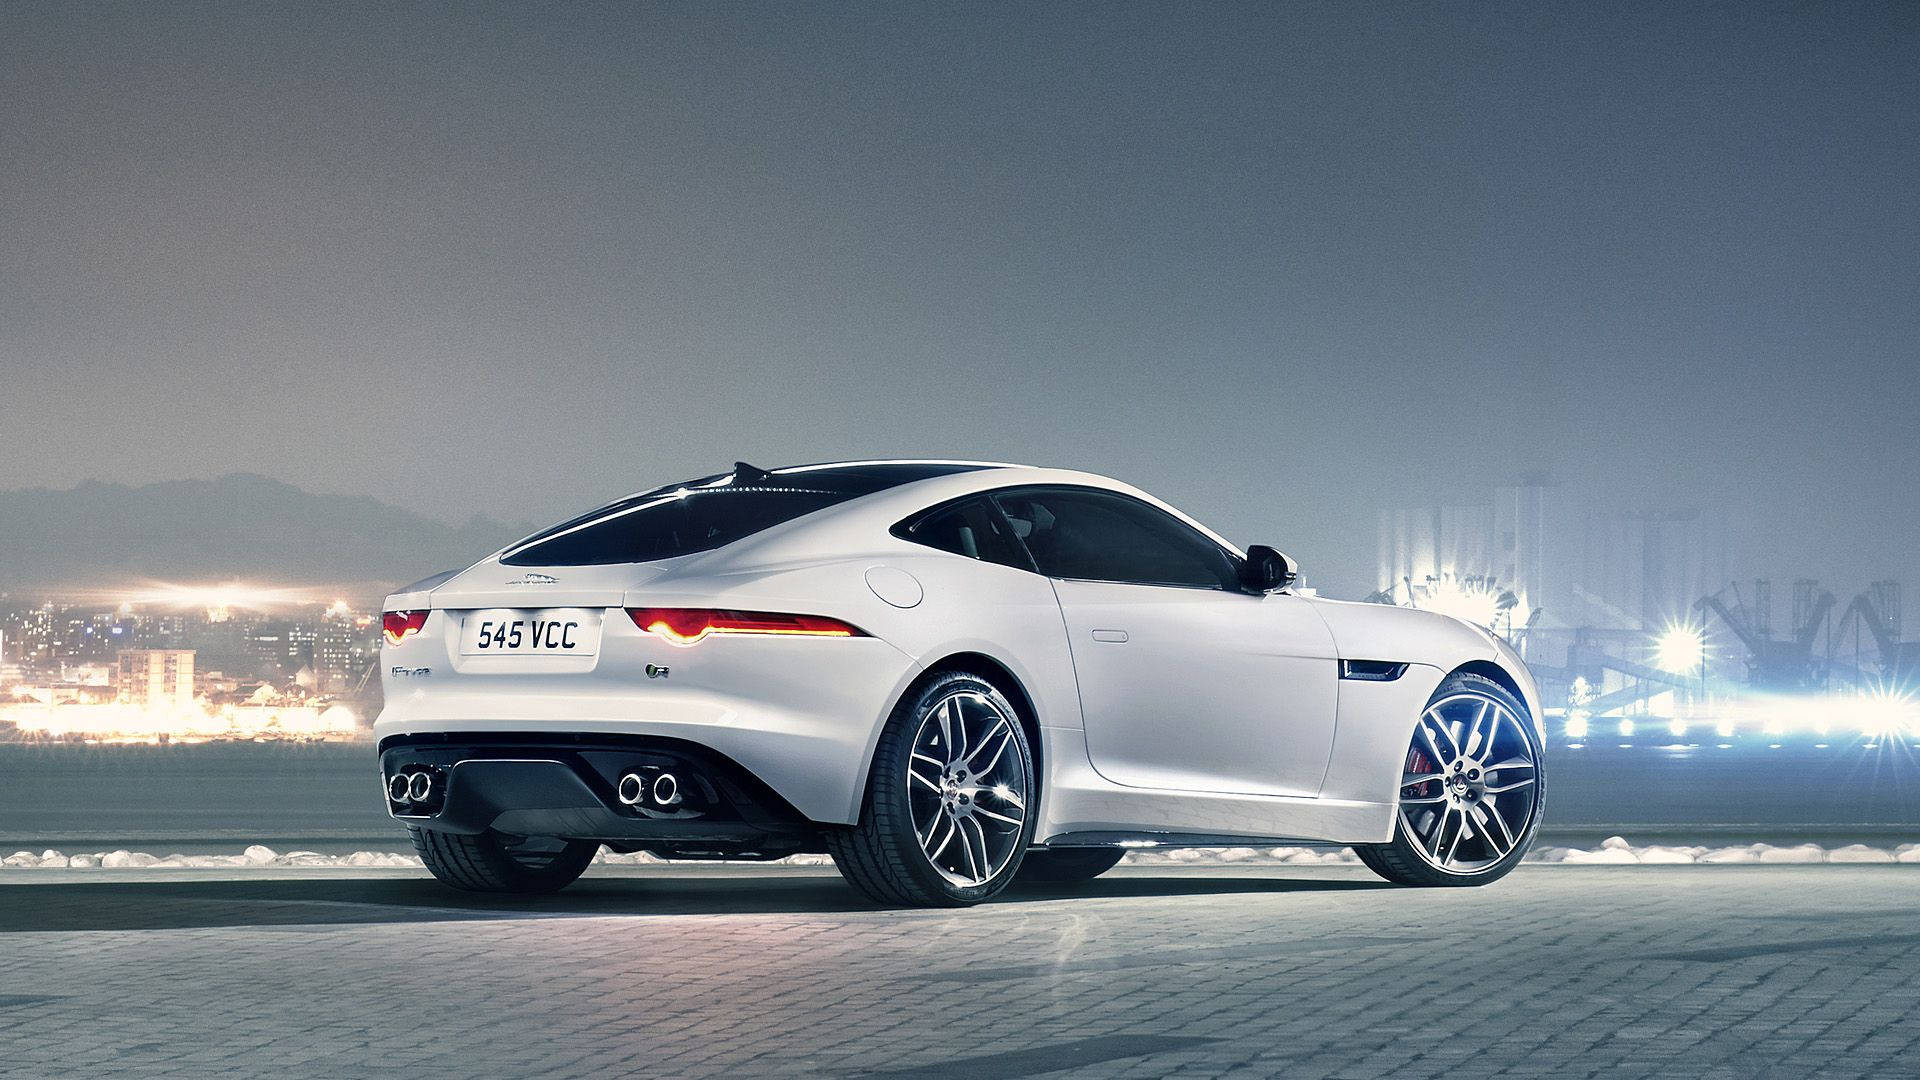 Speed Into The Night With This Sleek, Silver Jaguar Car